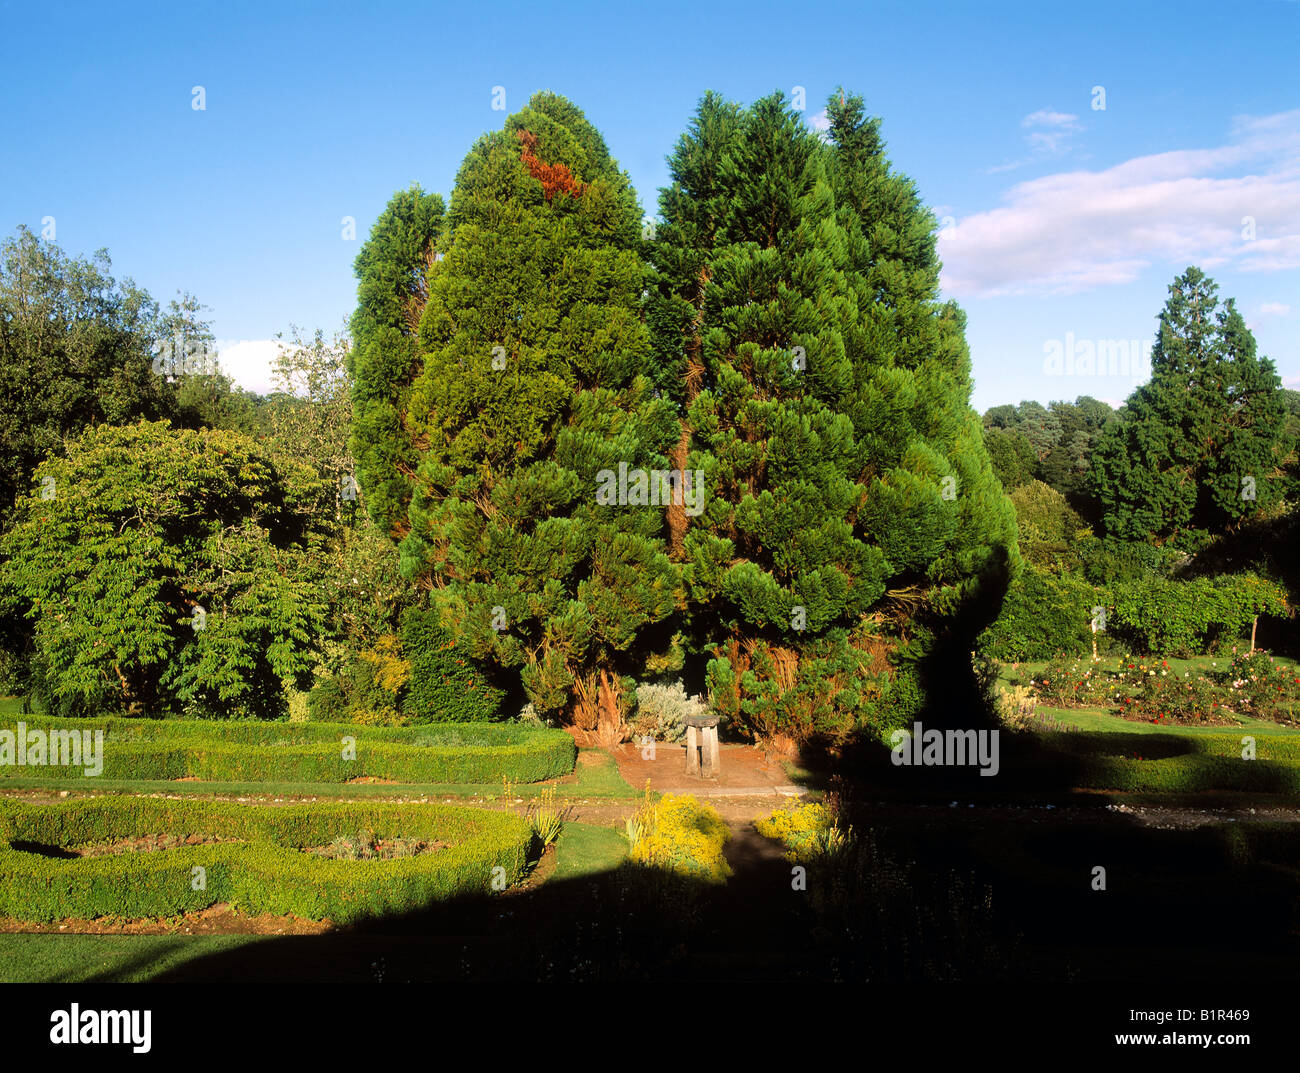 Yew Trees in the Walled Garden, Annes Grove, Co Cork, Ireland Stock Photo